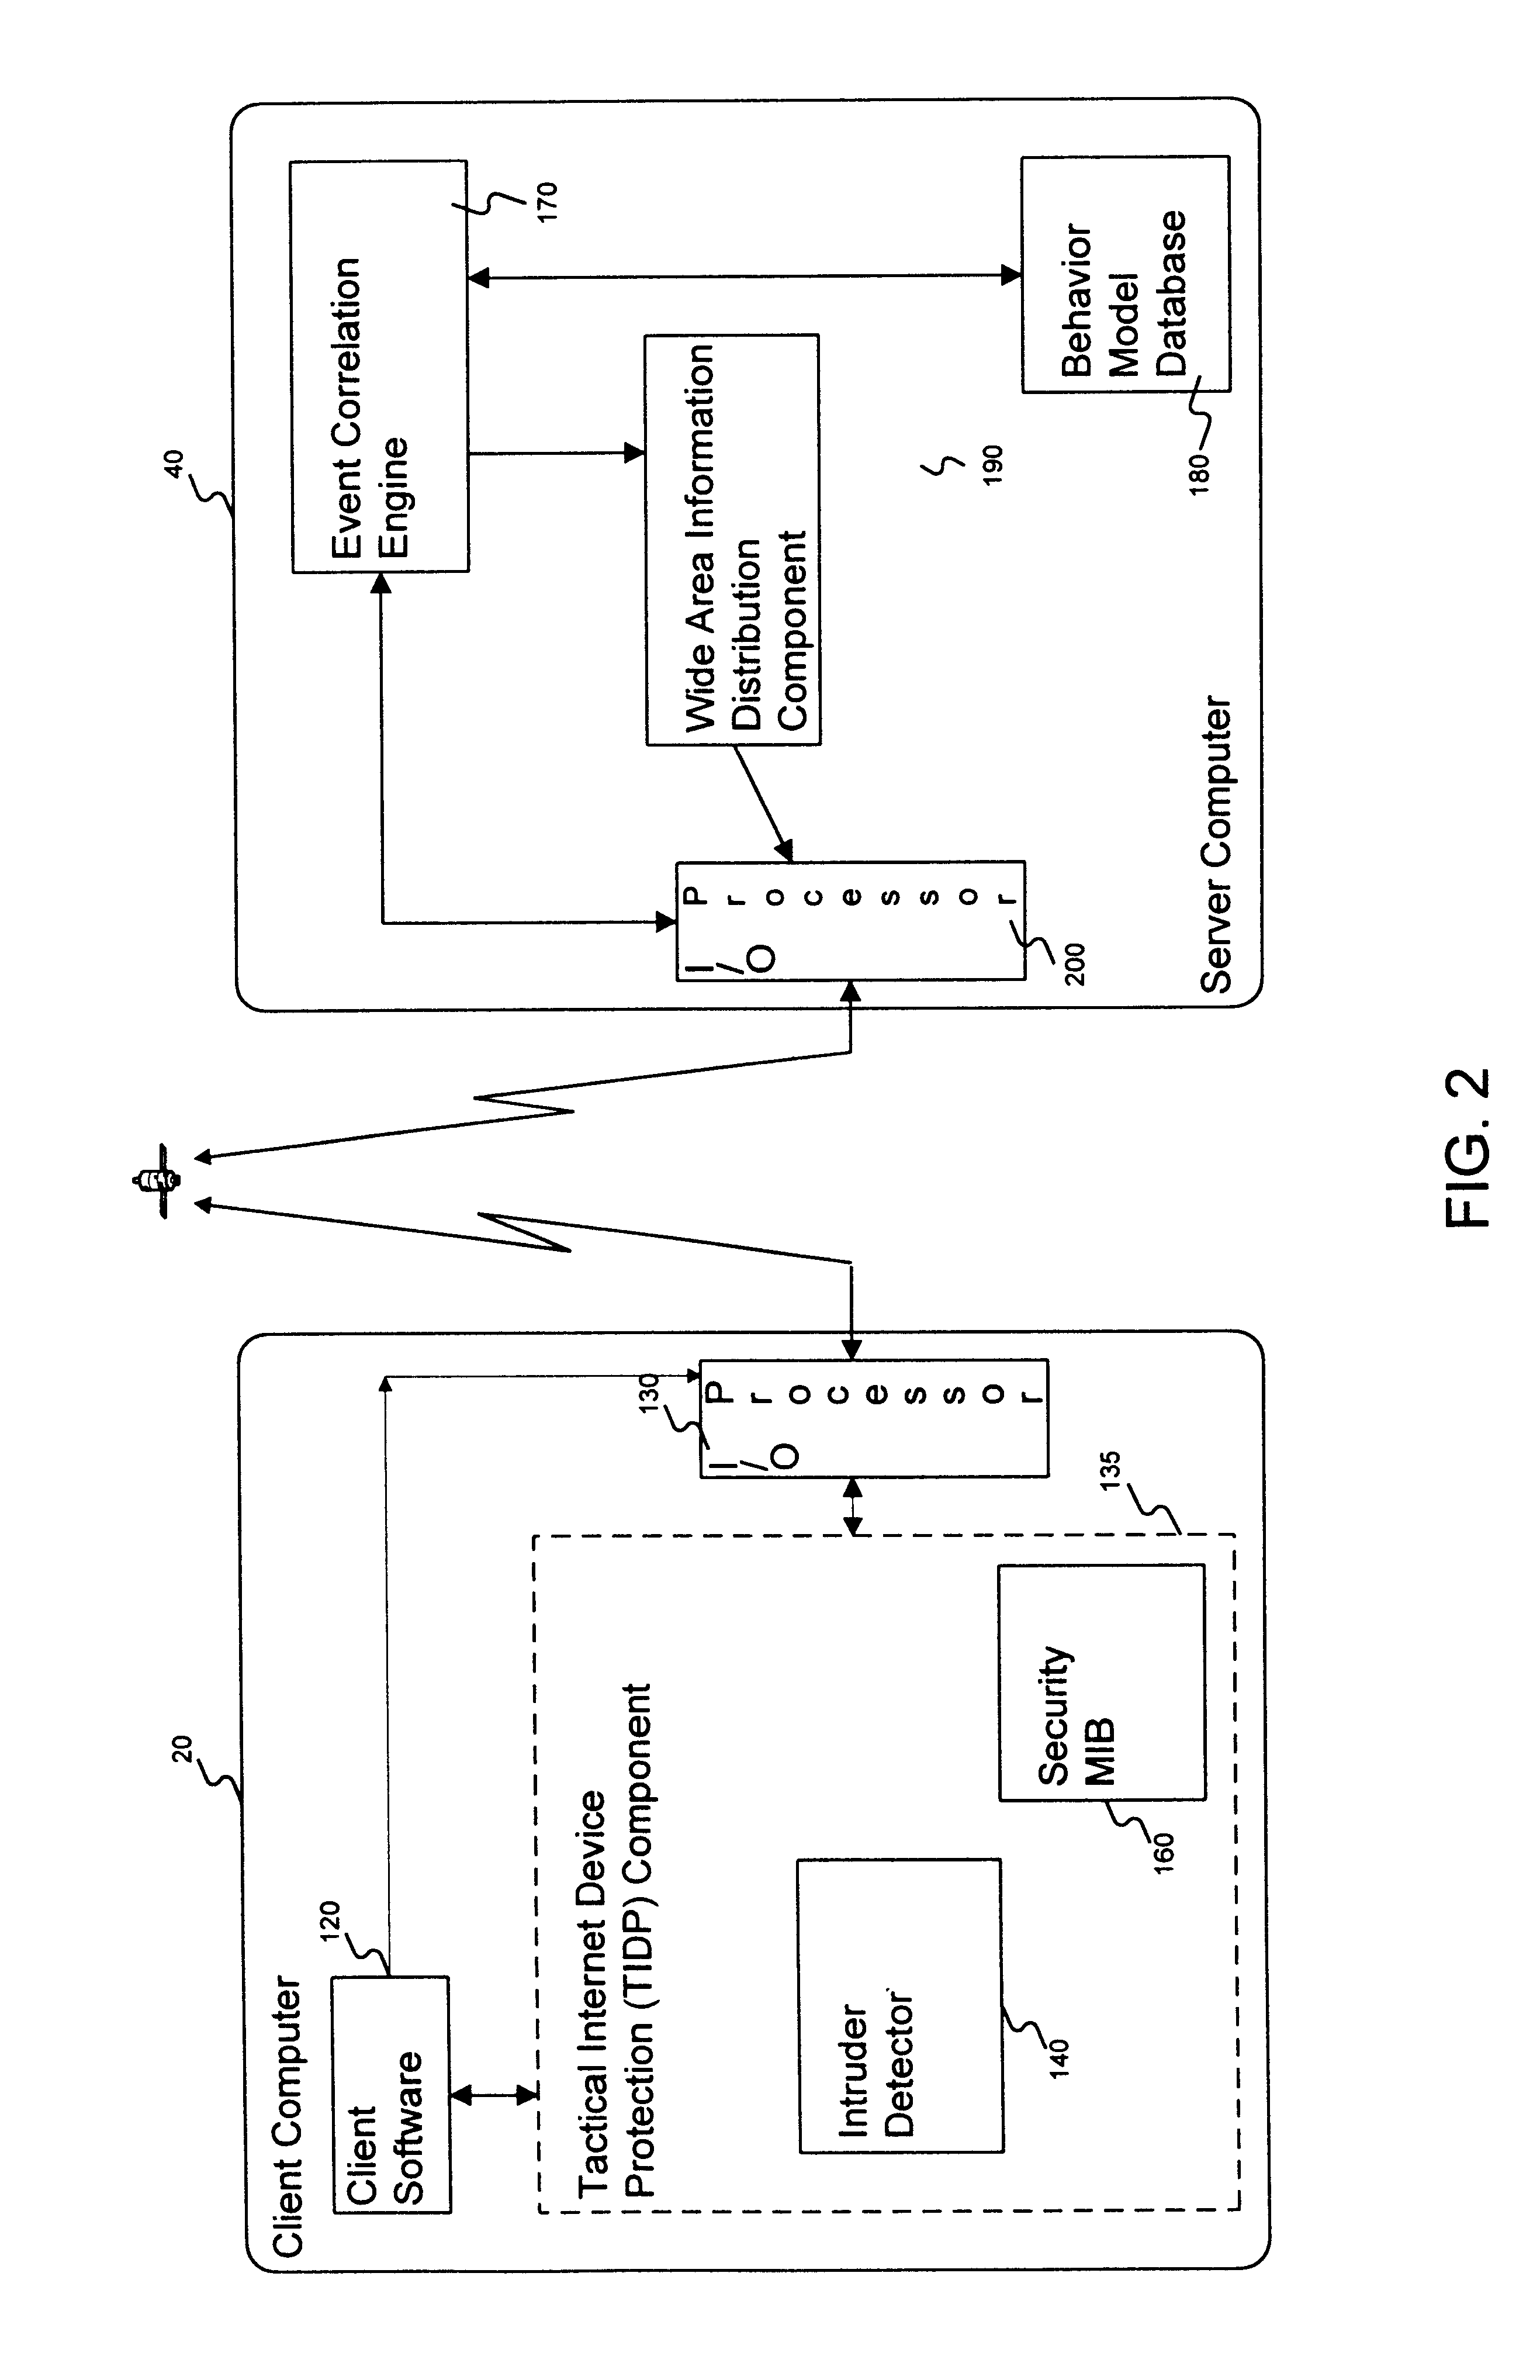 Method and apparatus for an intruder detection reporting and response system